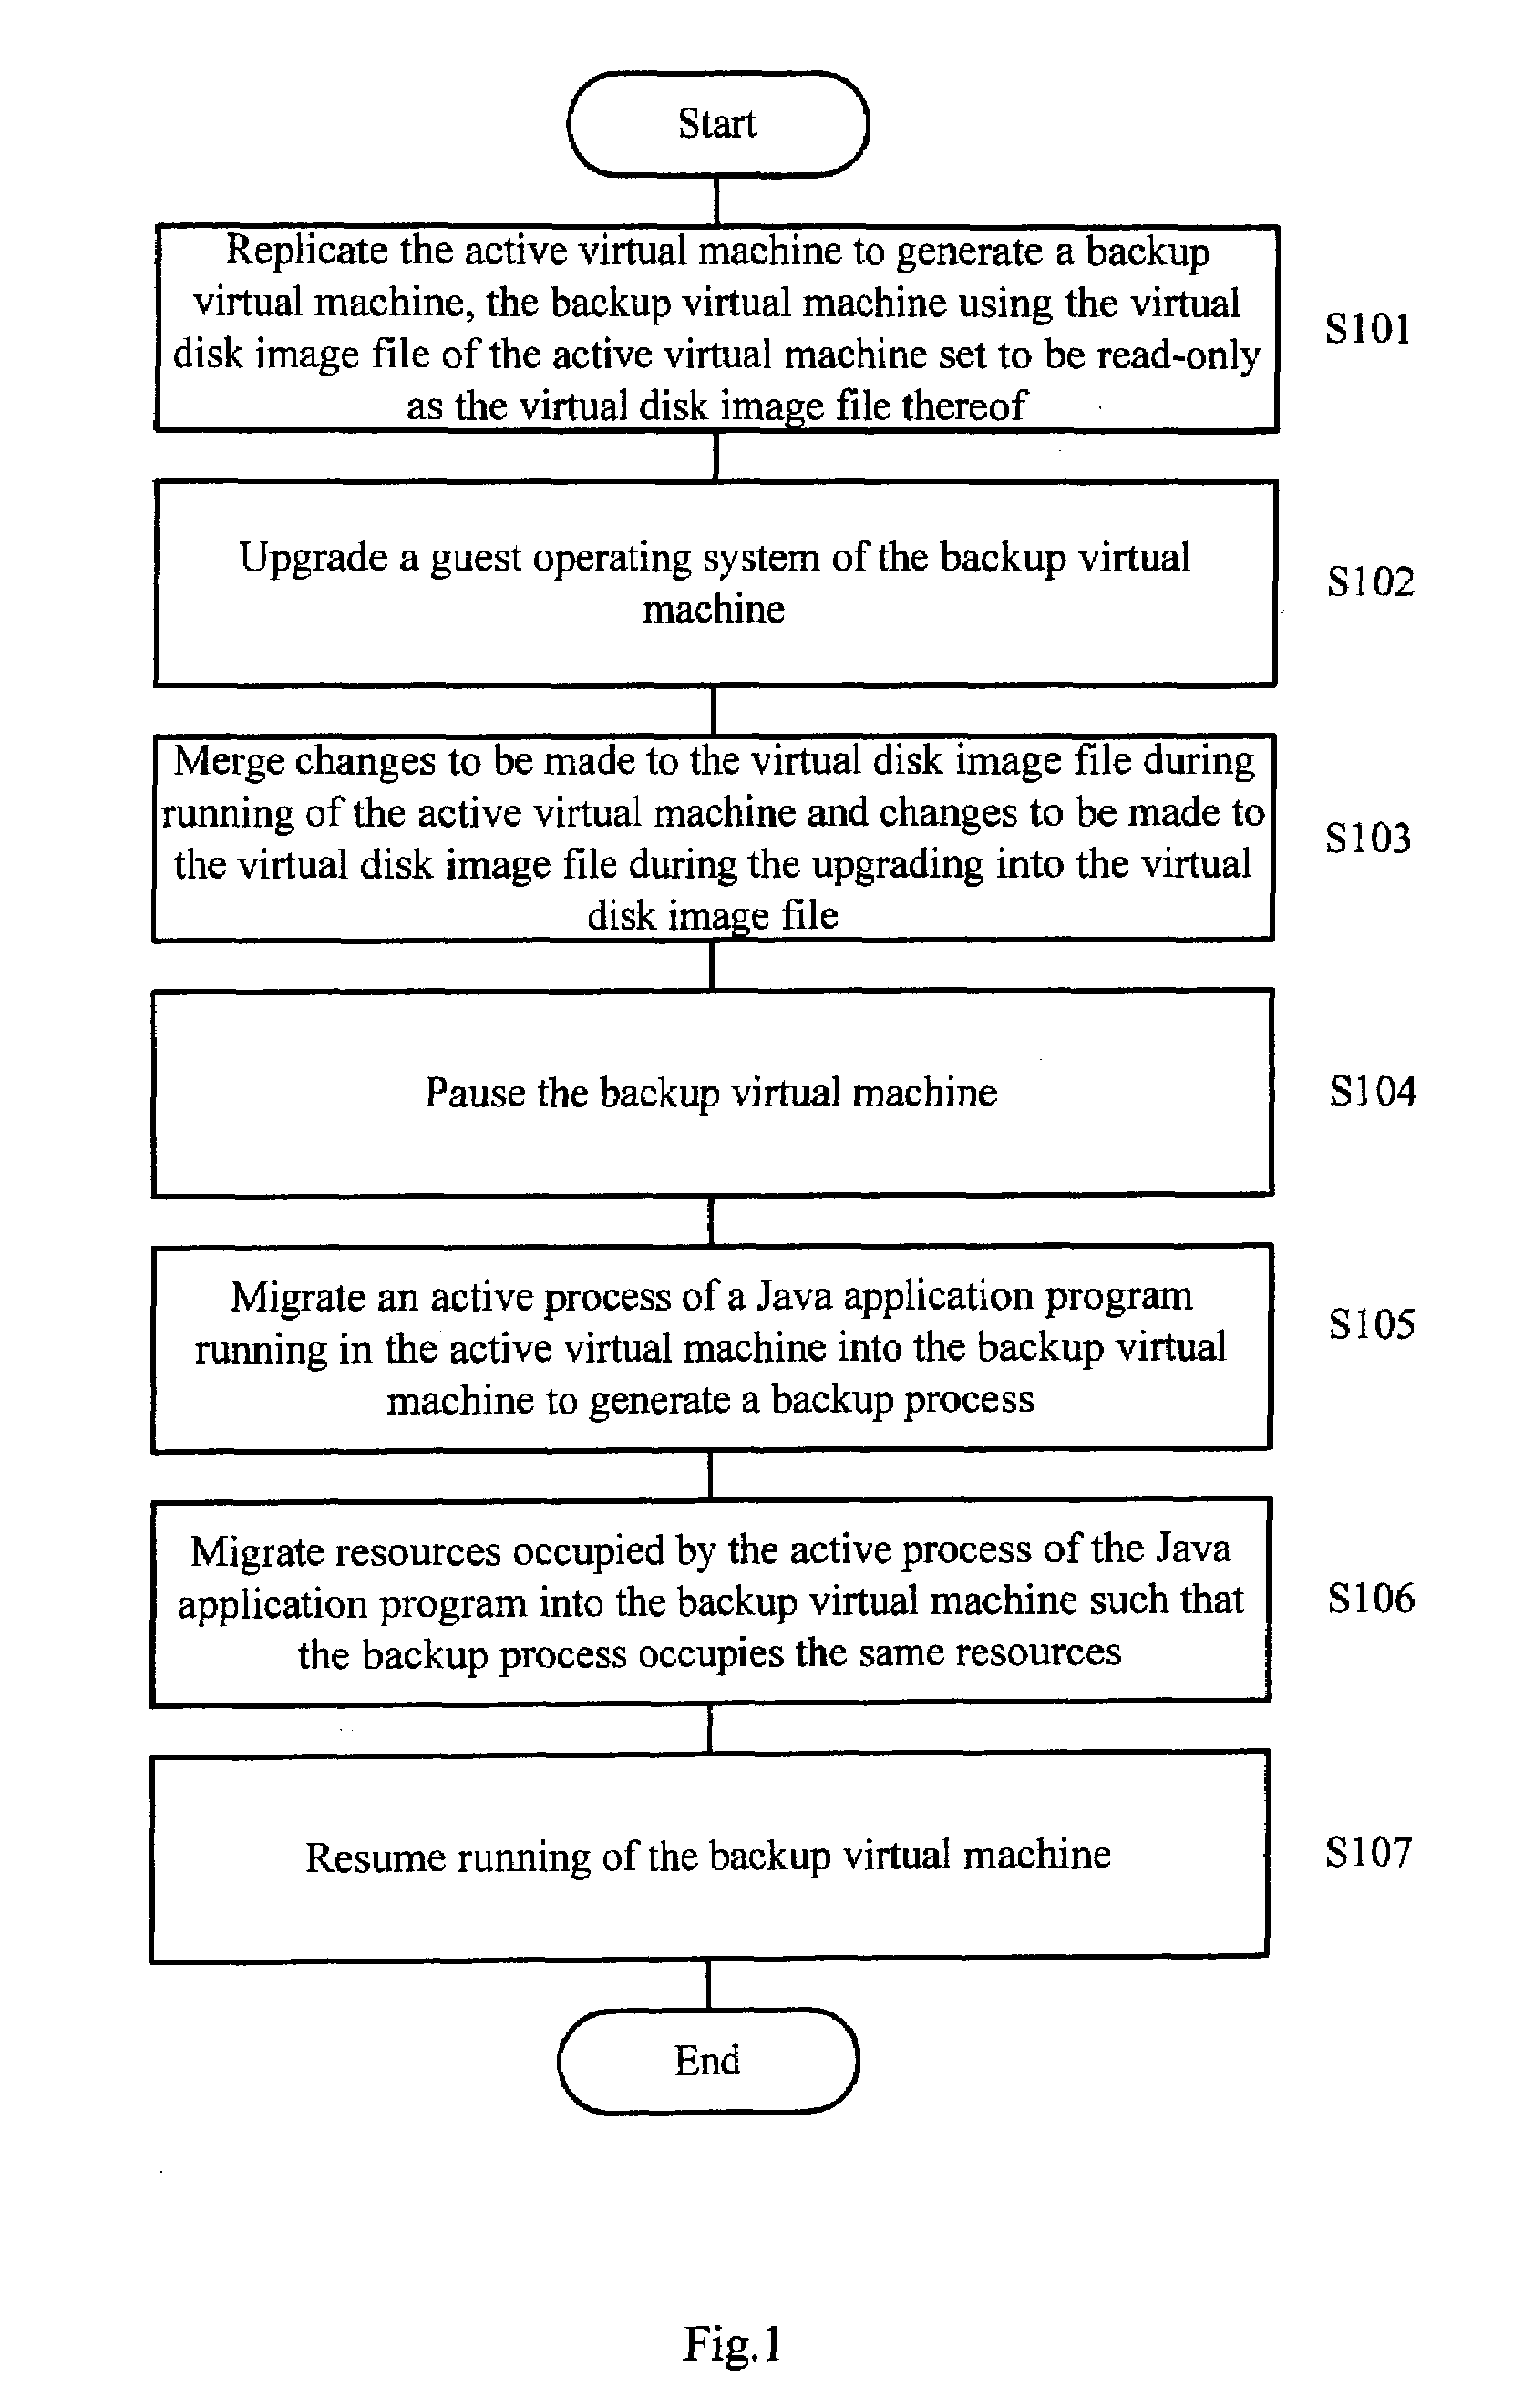 Method and Device for Upgrading a Guest Operating System of an Active Virtual Machine